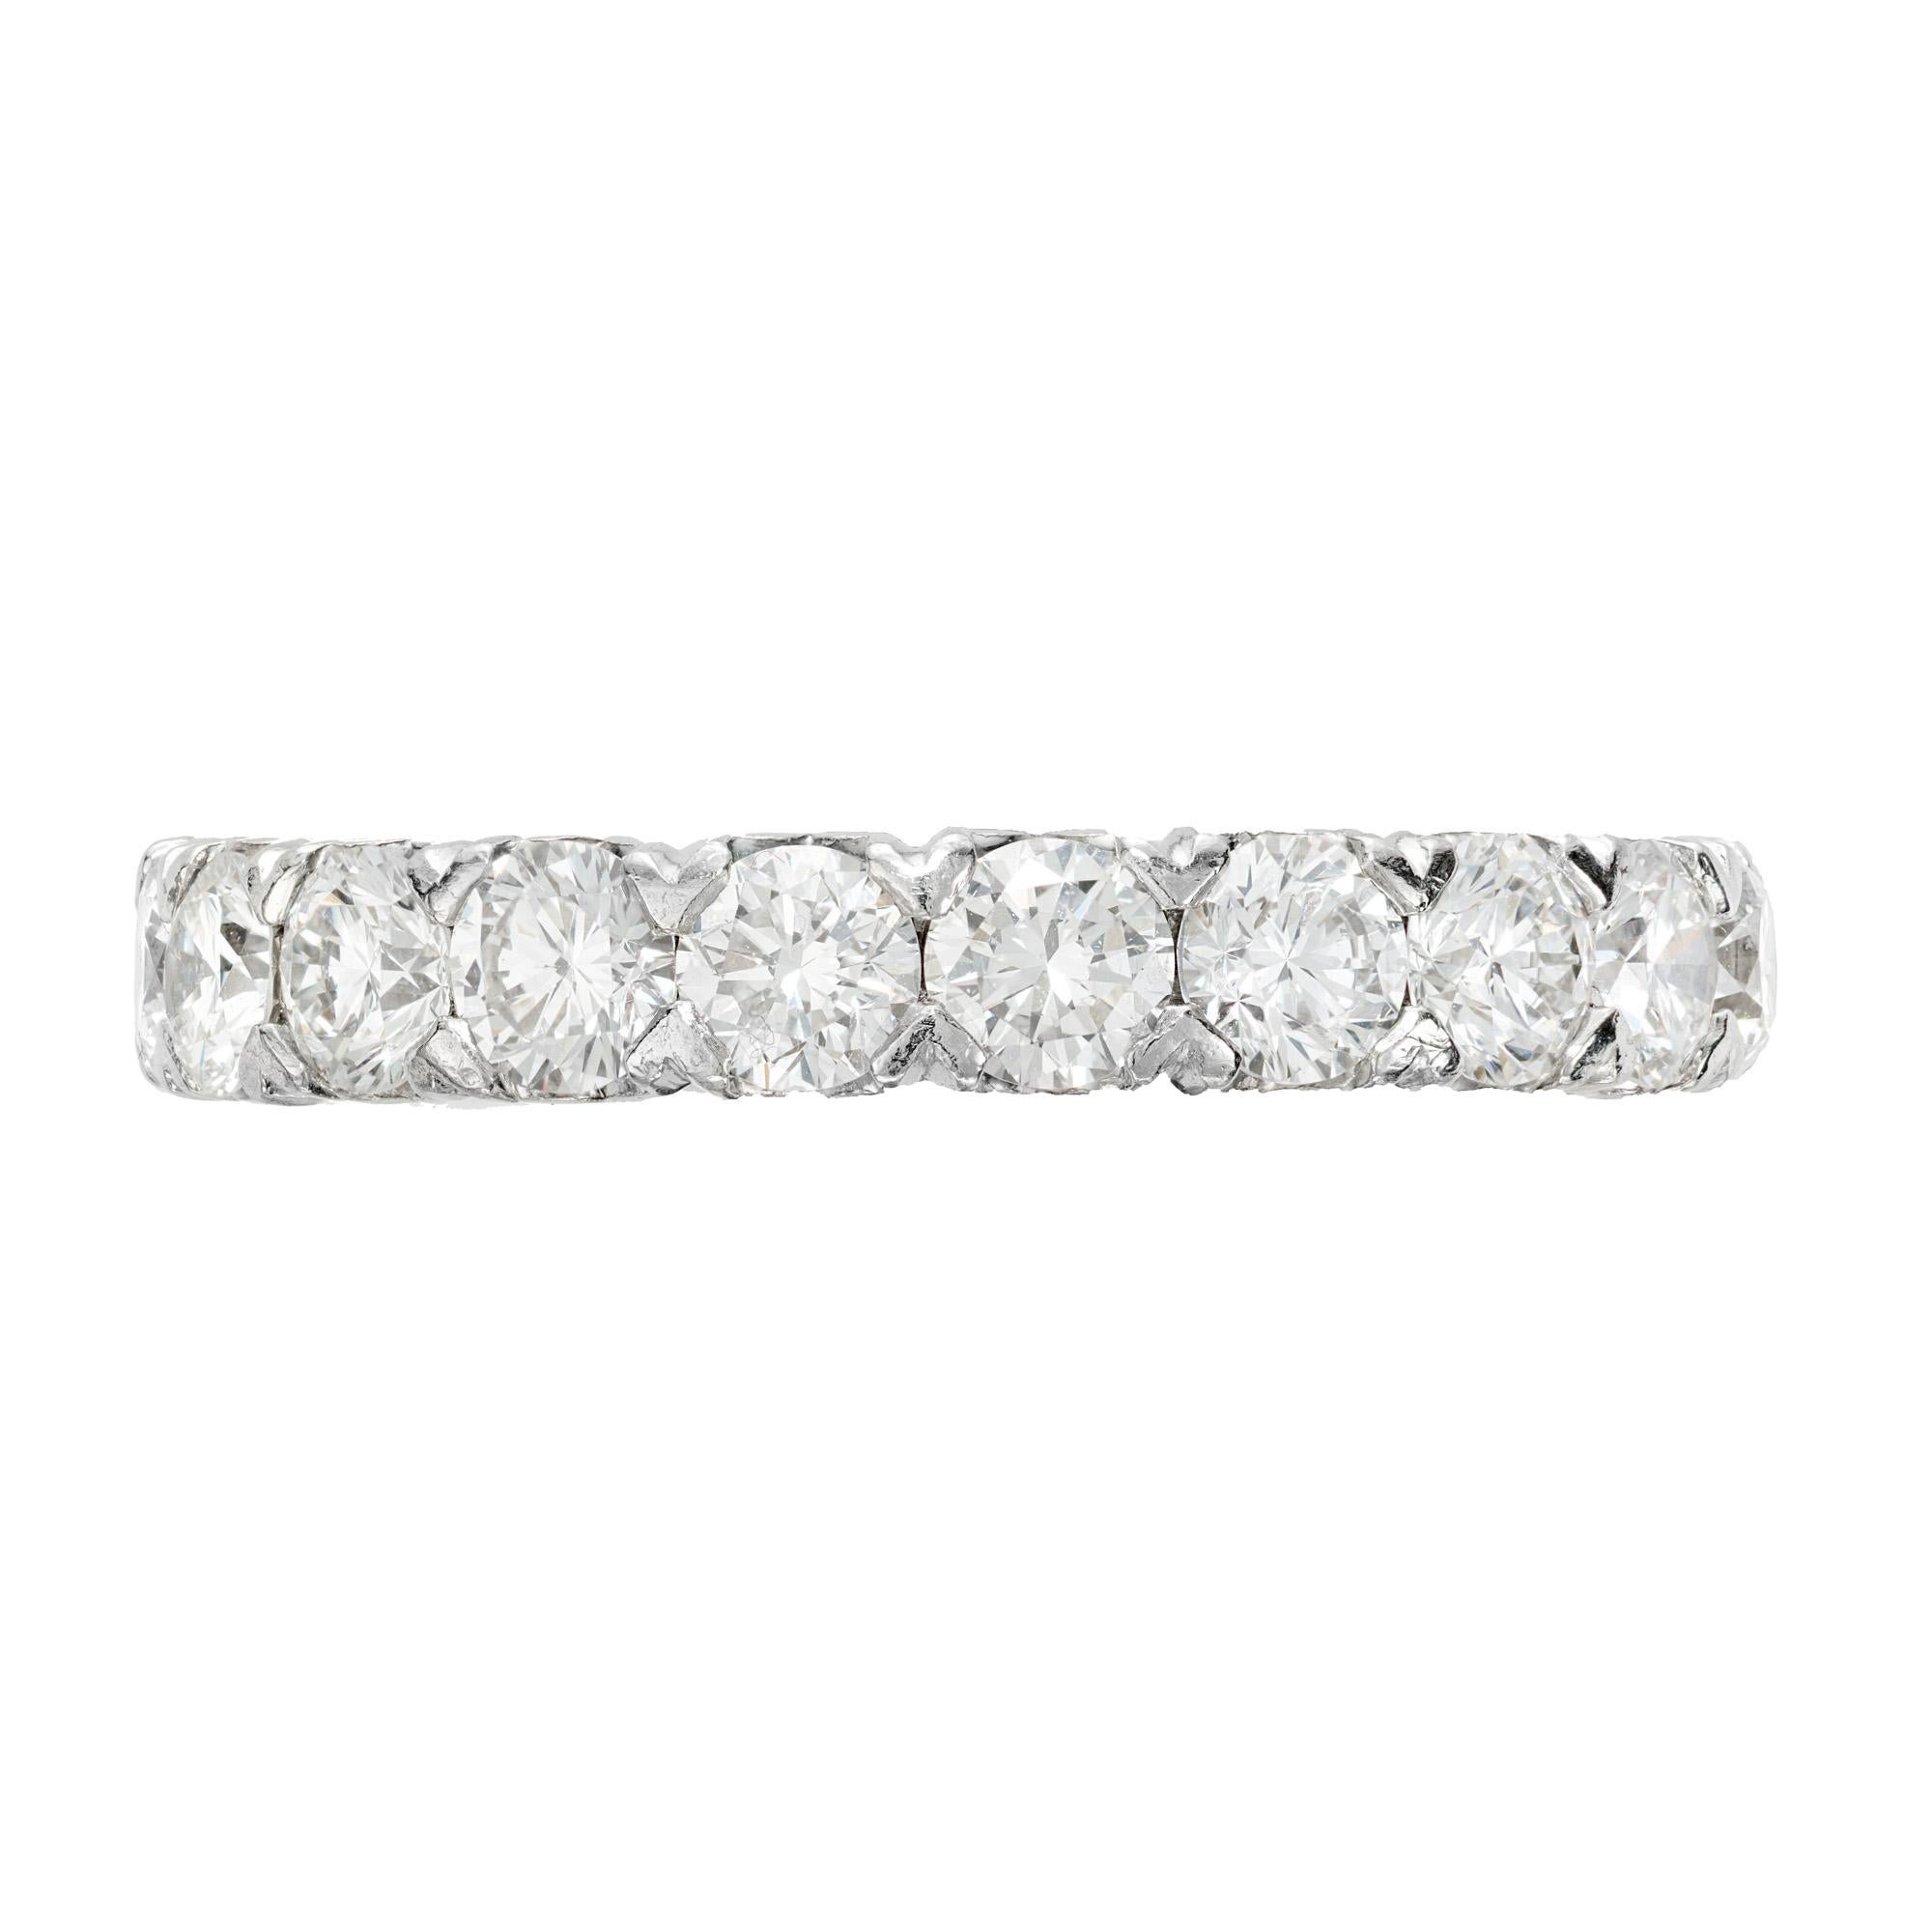 1950's Handmade custom diamond eternity band ring. 20 round brilliant cut diamonds set in a platinum setting. 

20 round brilliant cut diamonds, F-G VS approx. 2.80cts
Size 6.5 and sizable 
Platinum 
Stamped: PT 950
5.9 grams
Width at top: